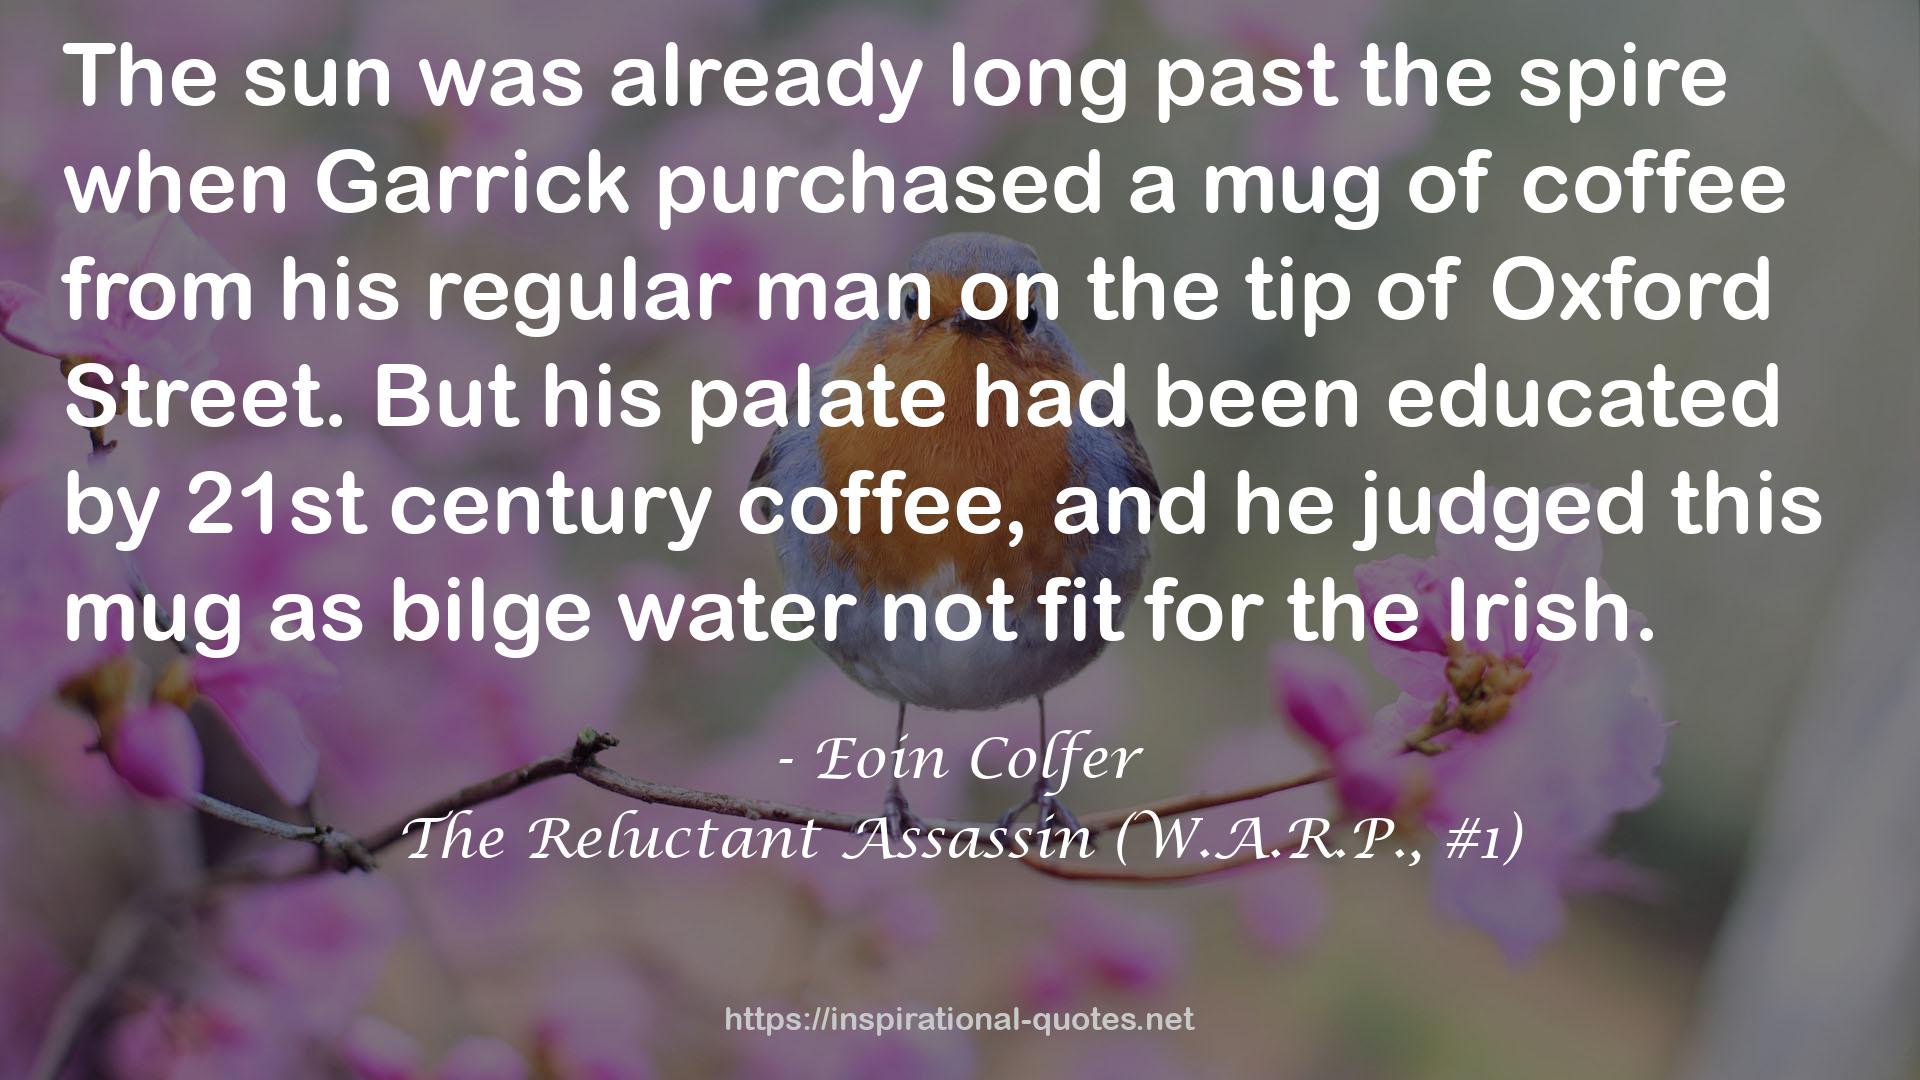 The Reluctant Assassin (W.A.R.P., #1) QUOTES